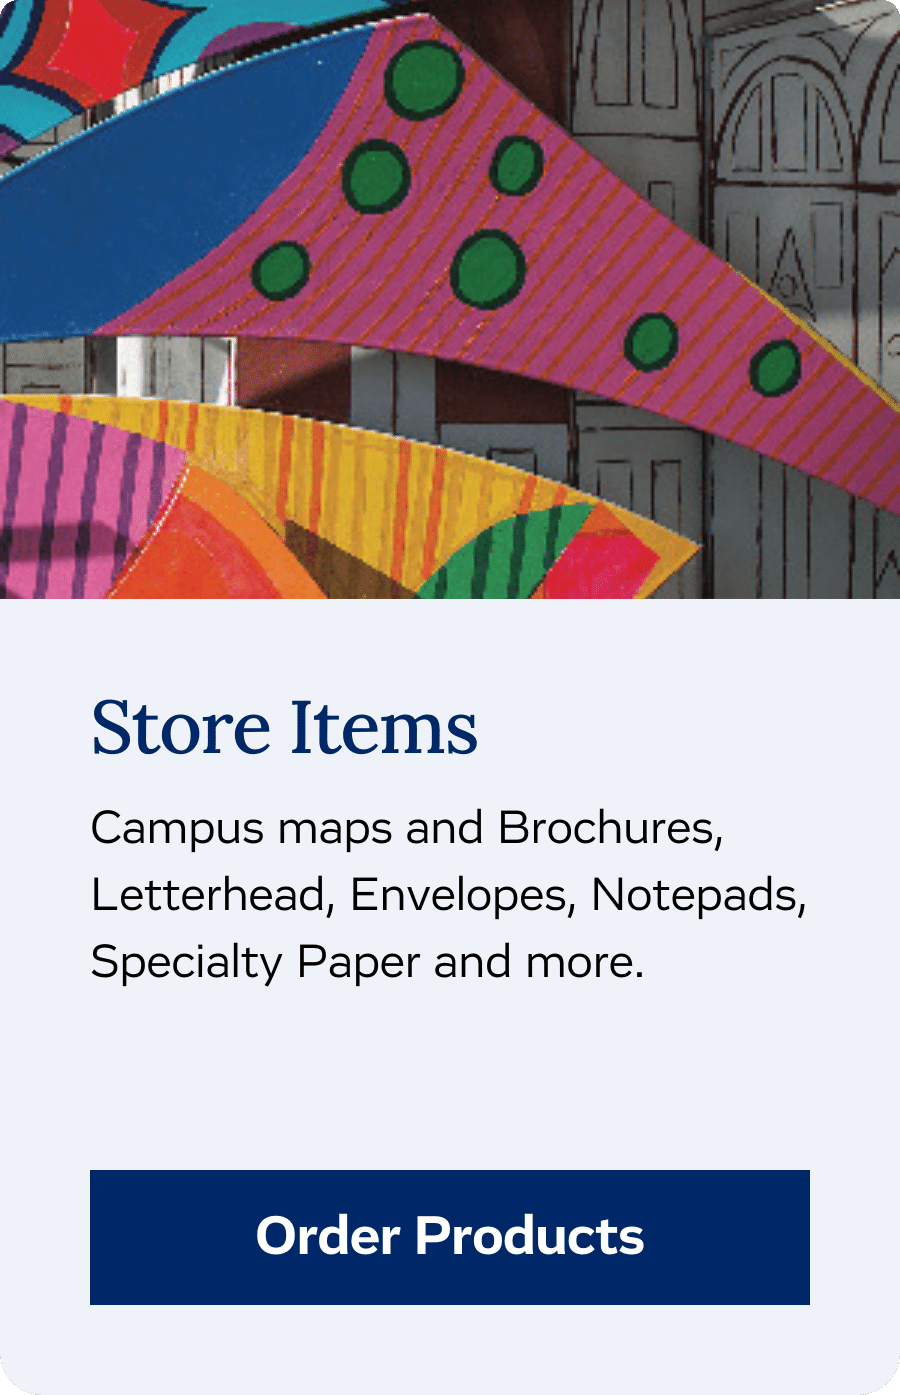 Store Items: University letterhead, envelopes, paper reams, notepads, and more. Order Products.